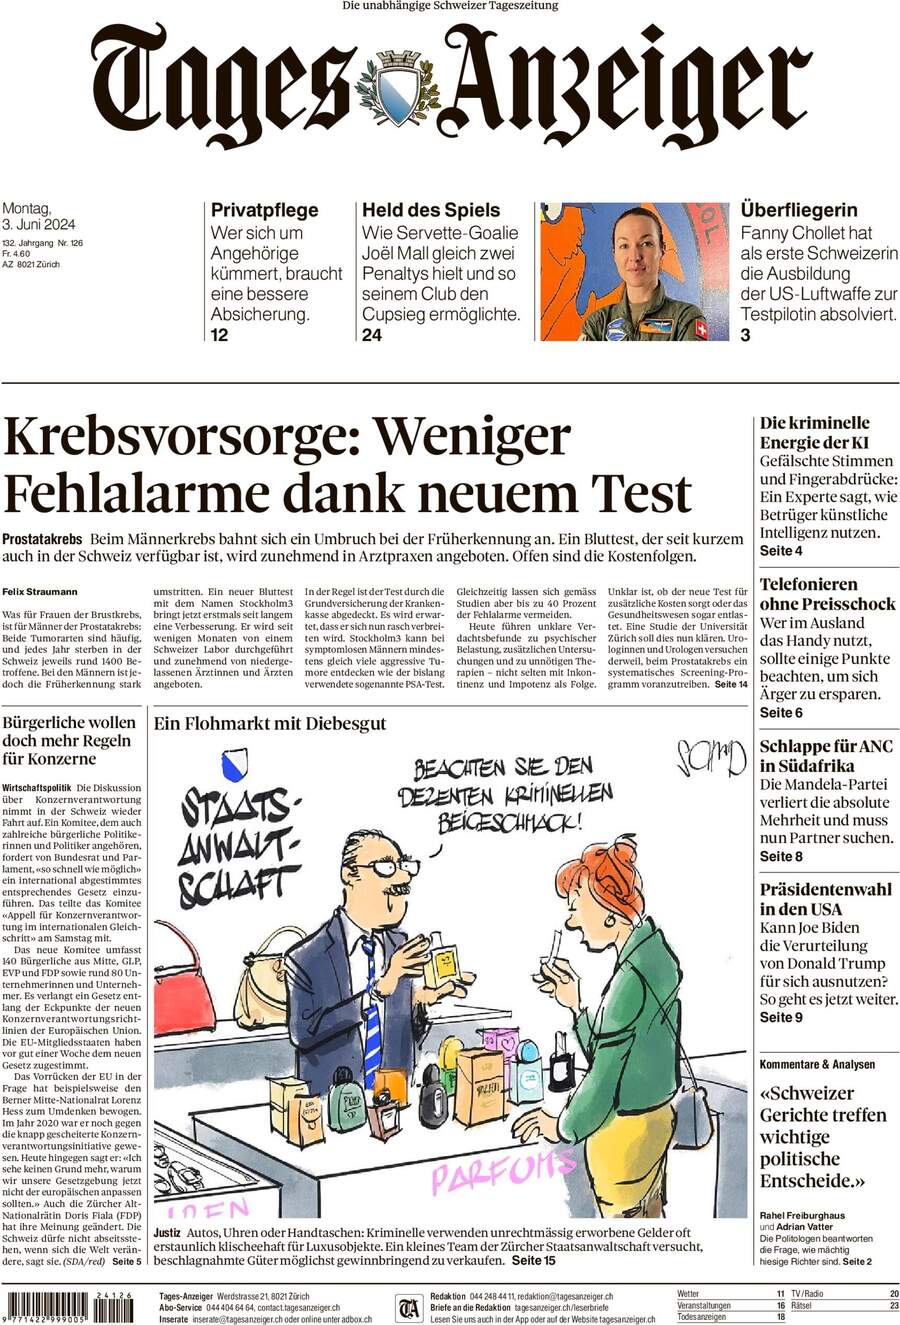 Tages-Anzeiger (Tagi TA) - Front Page - 06/03/2024